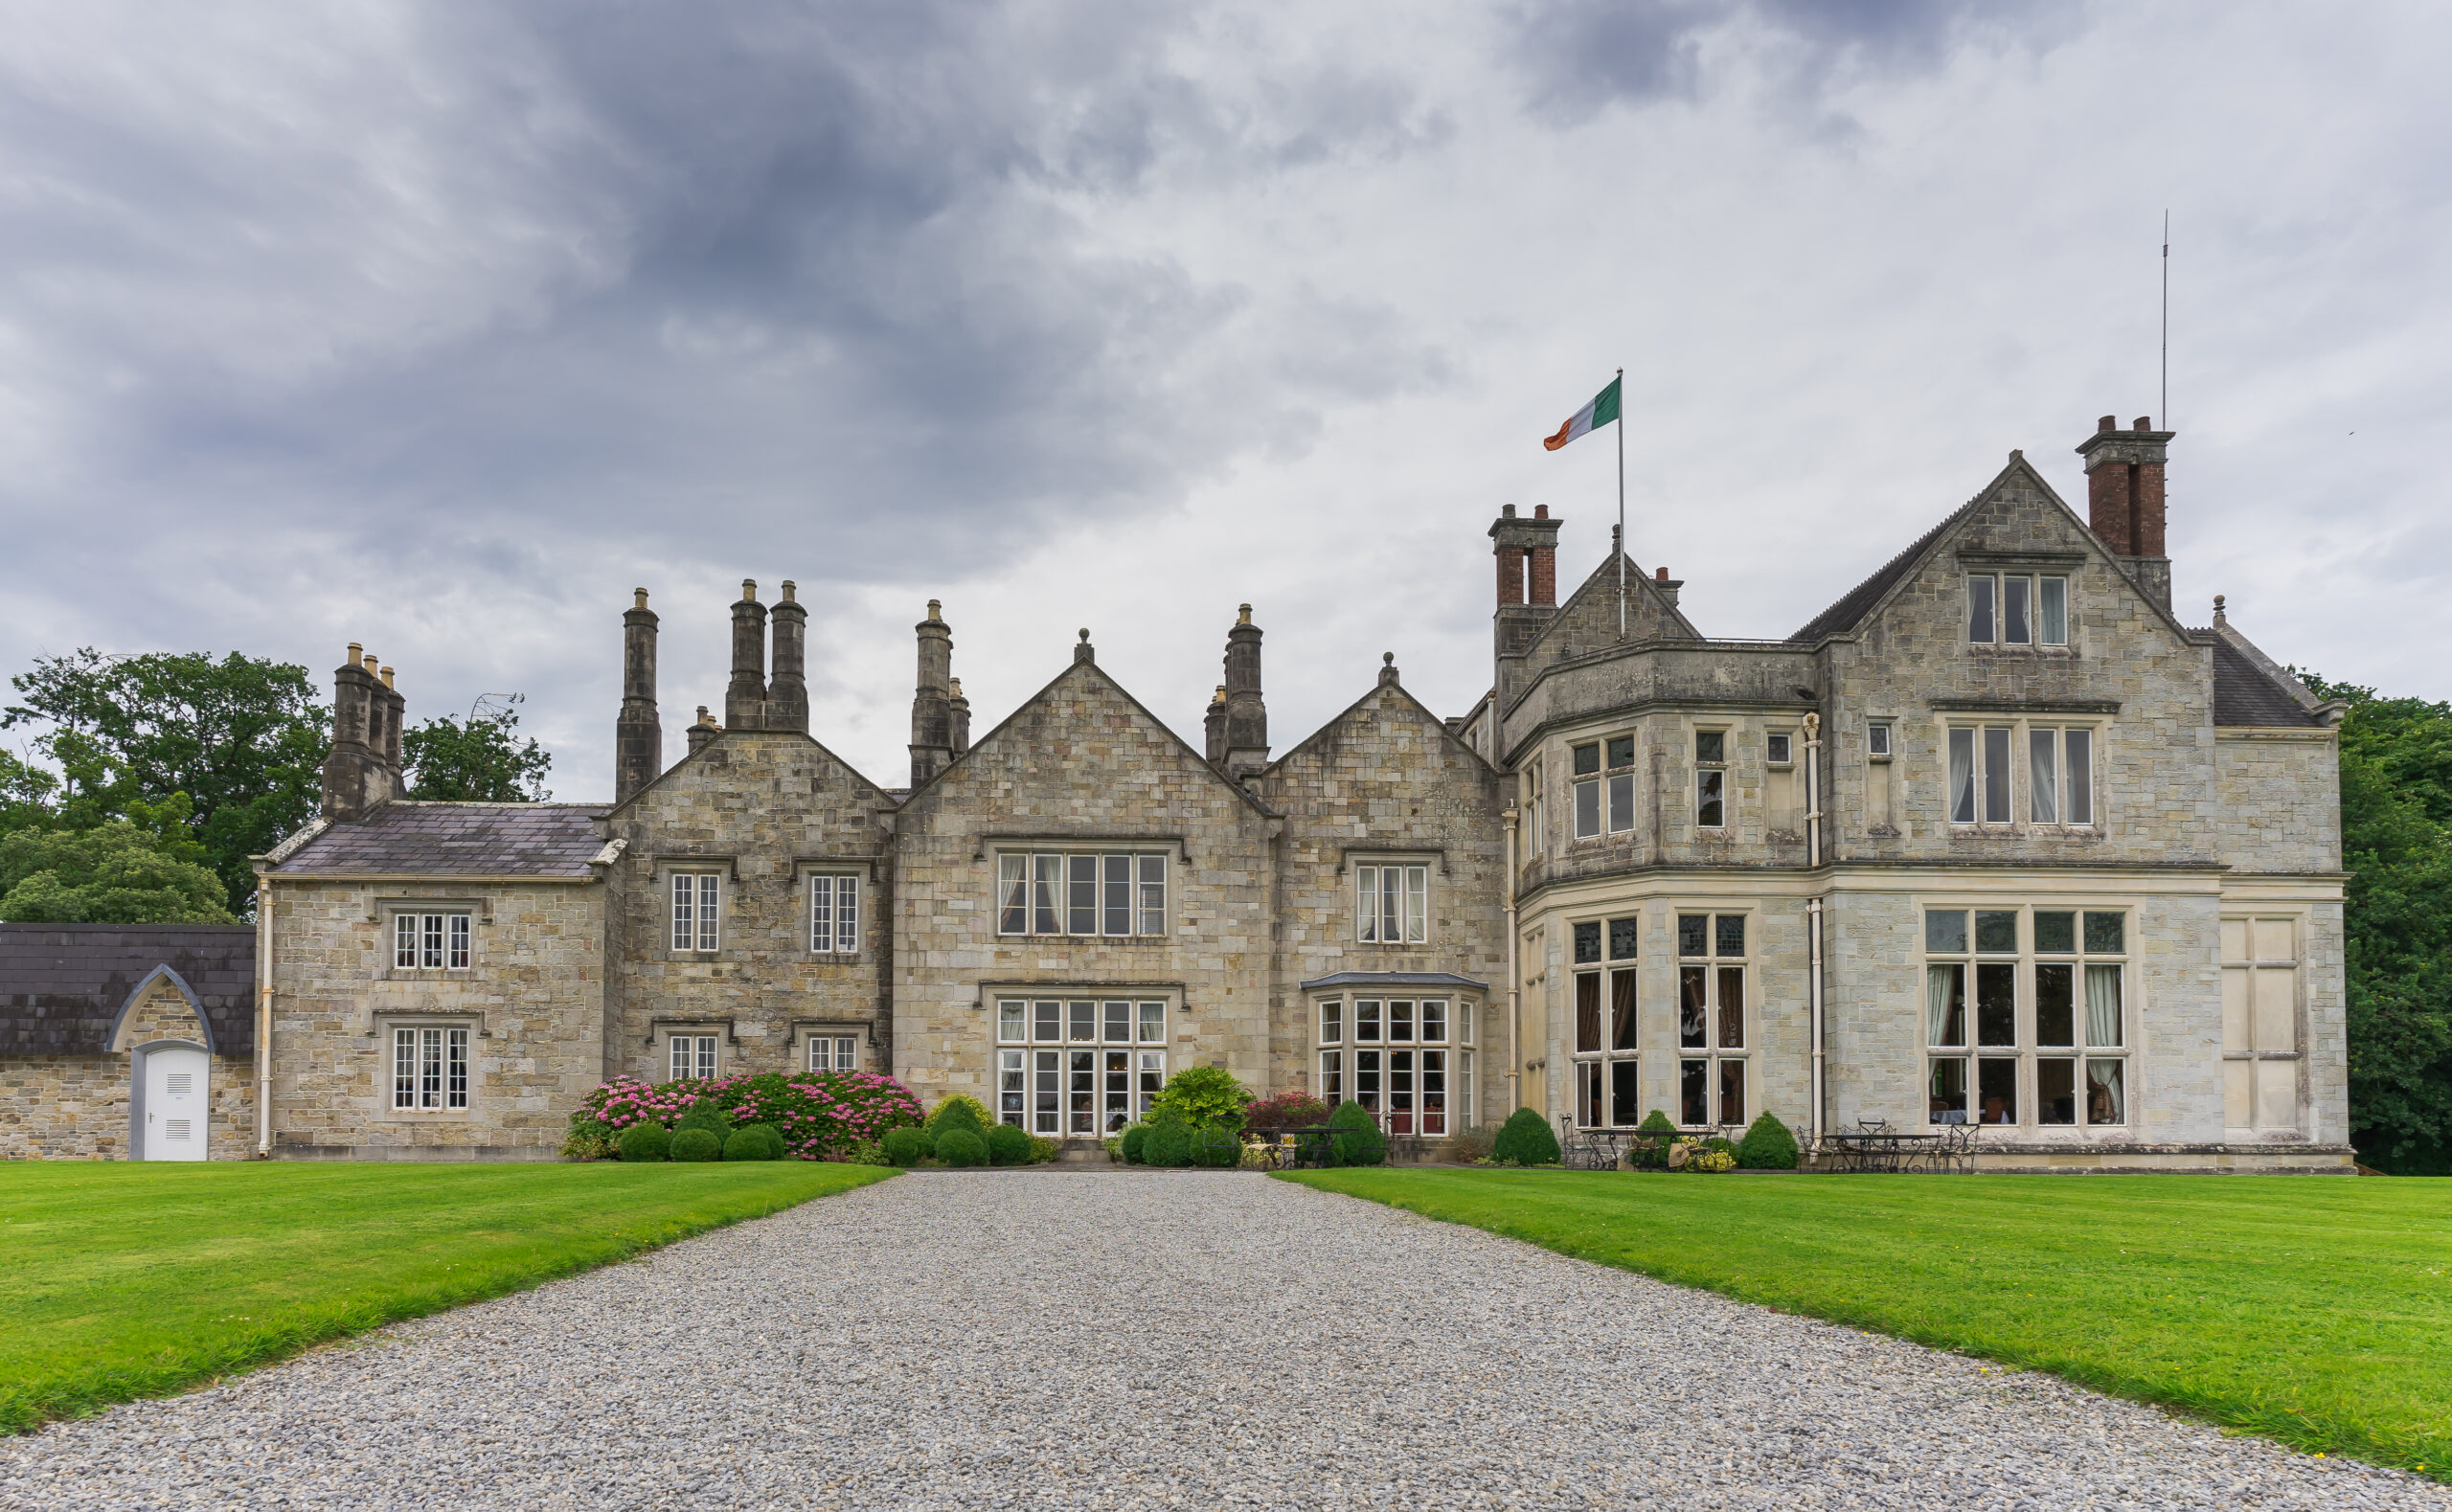 View of Lough Rynn Castle which has tons of windows and is proudly flying an Irish flag. 